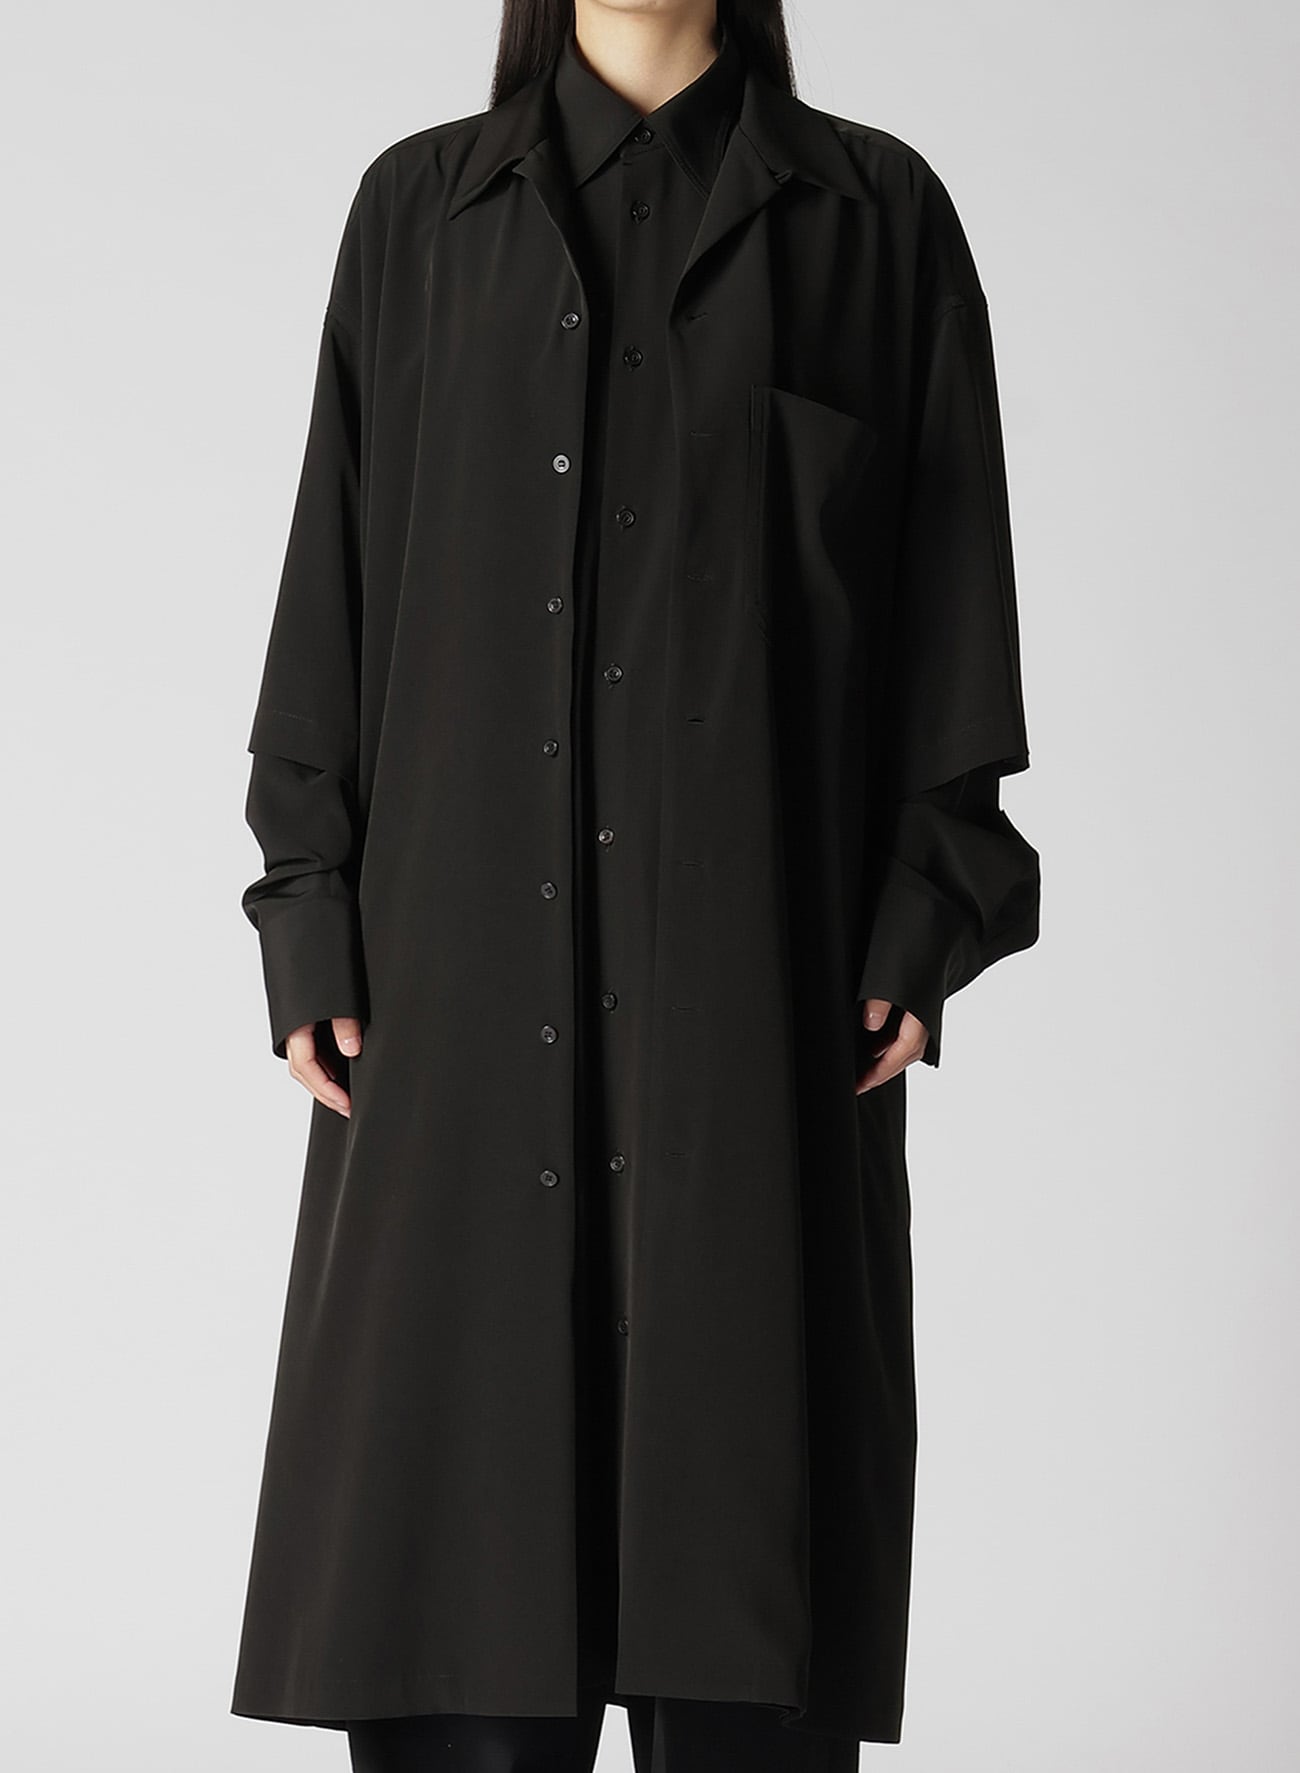 【8/7 12:00(JST) Release】TRIACETATE/POLYESTER DOUBLE LAYERED LONG SHIRT